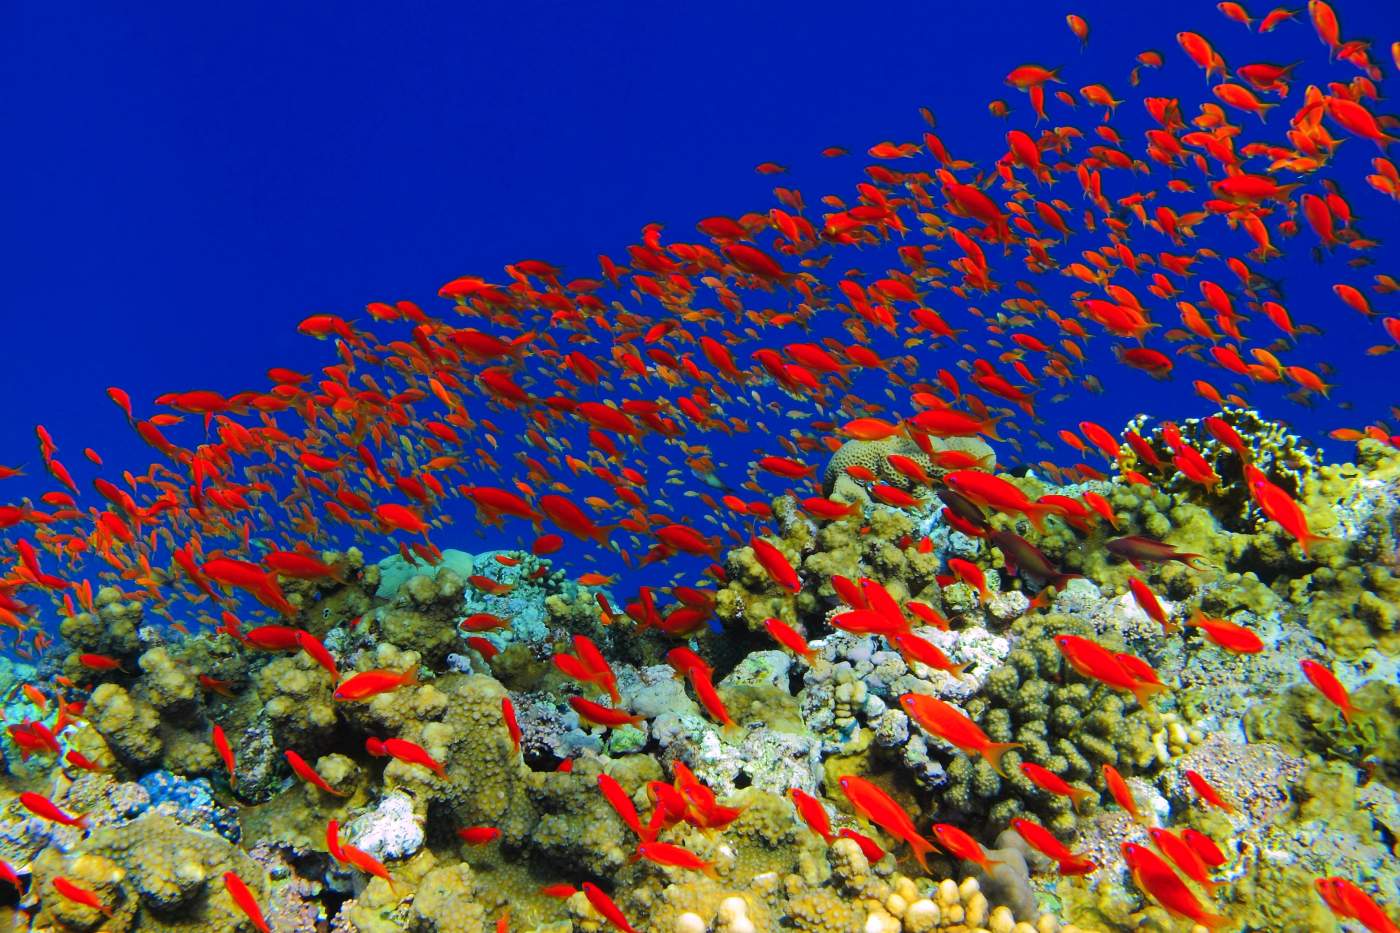 Elphinstone reef, a beautiful coral and an abundance of anthias fish.